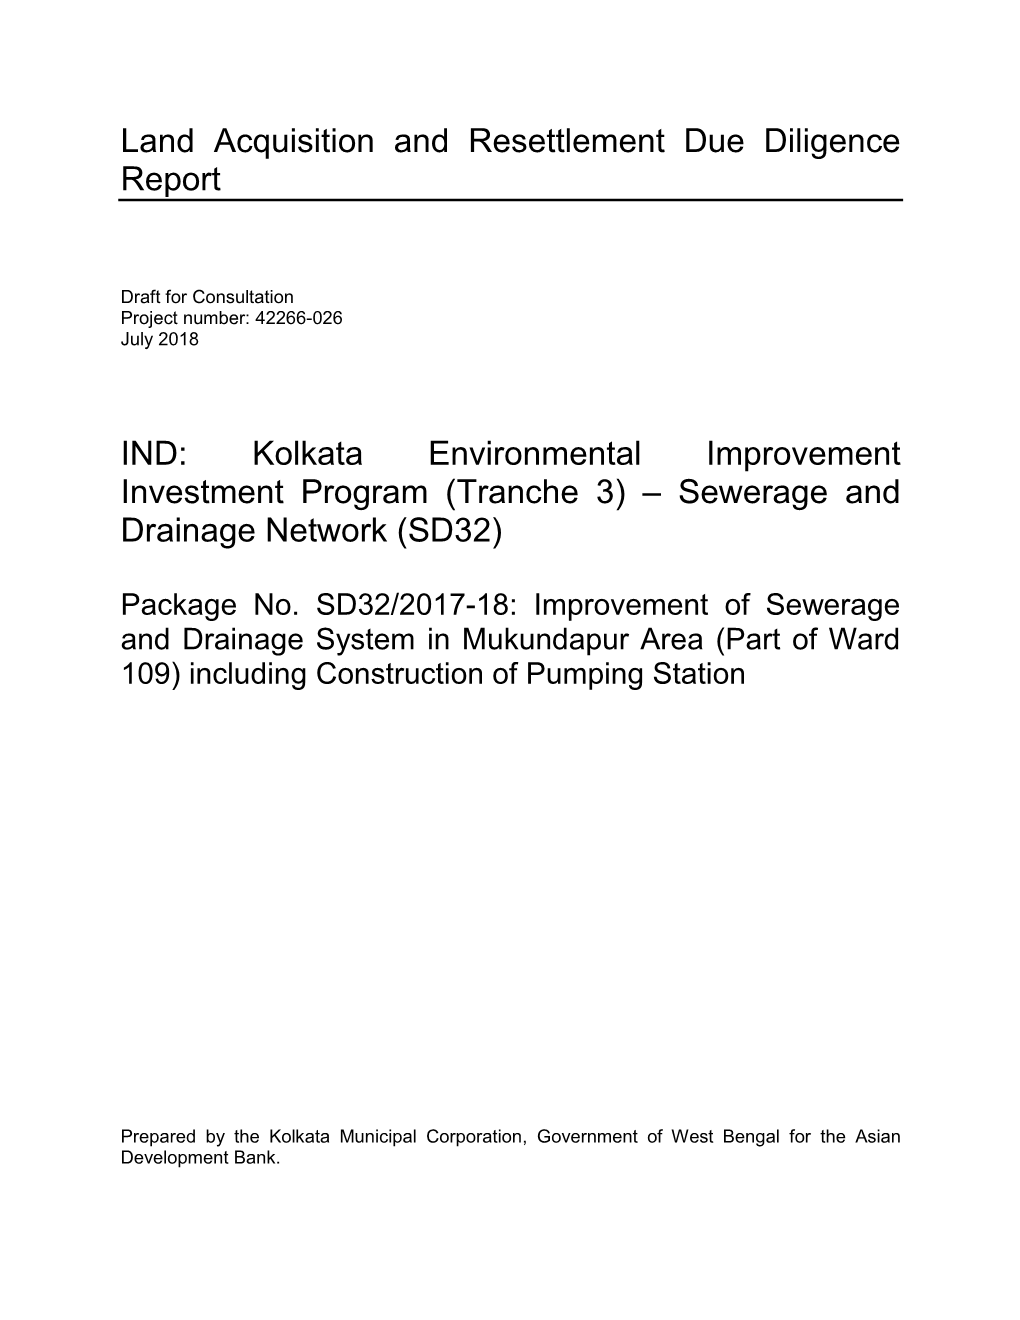 Land Acquisition and Resettlement Due Diligence Report